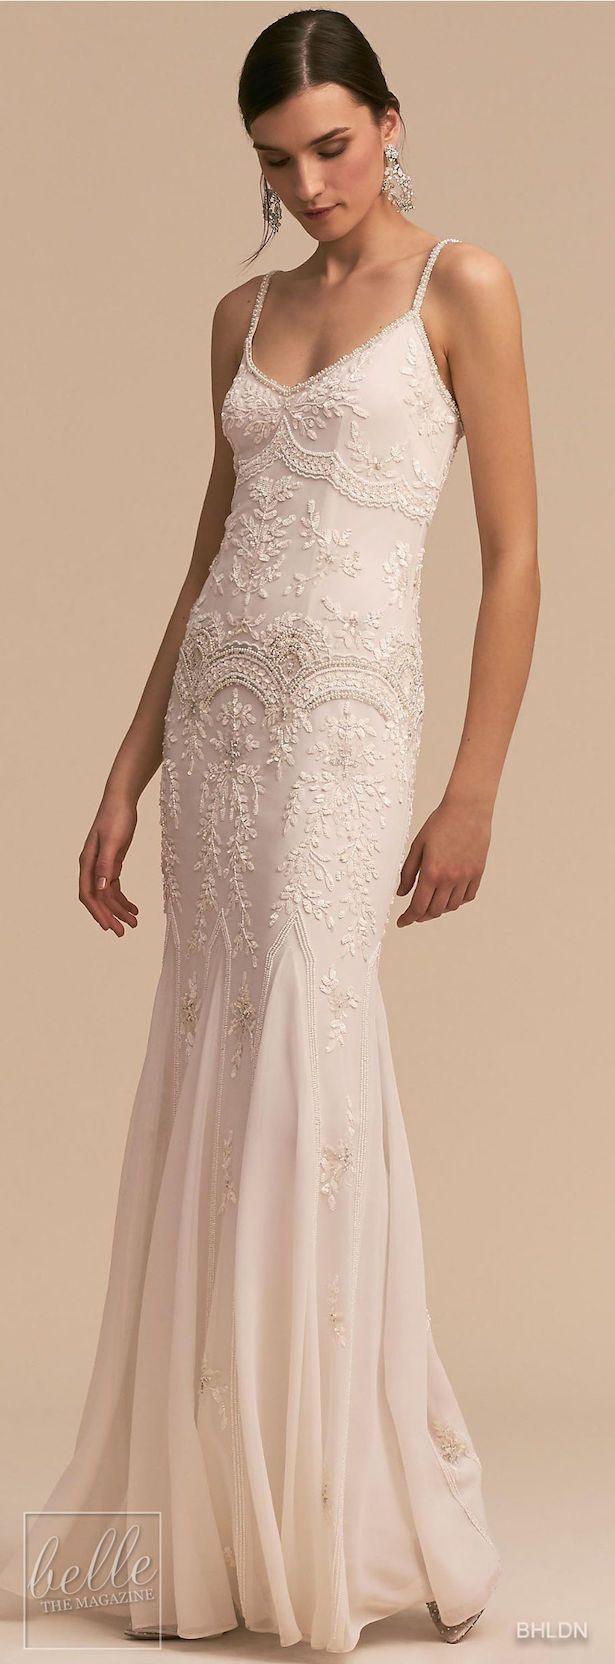 Wedding - Our Favorite Wedding Dresses From BHLDN